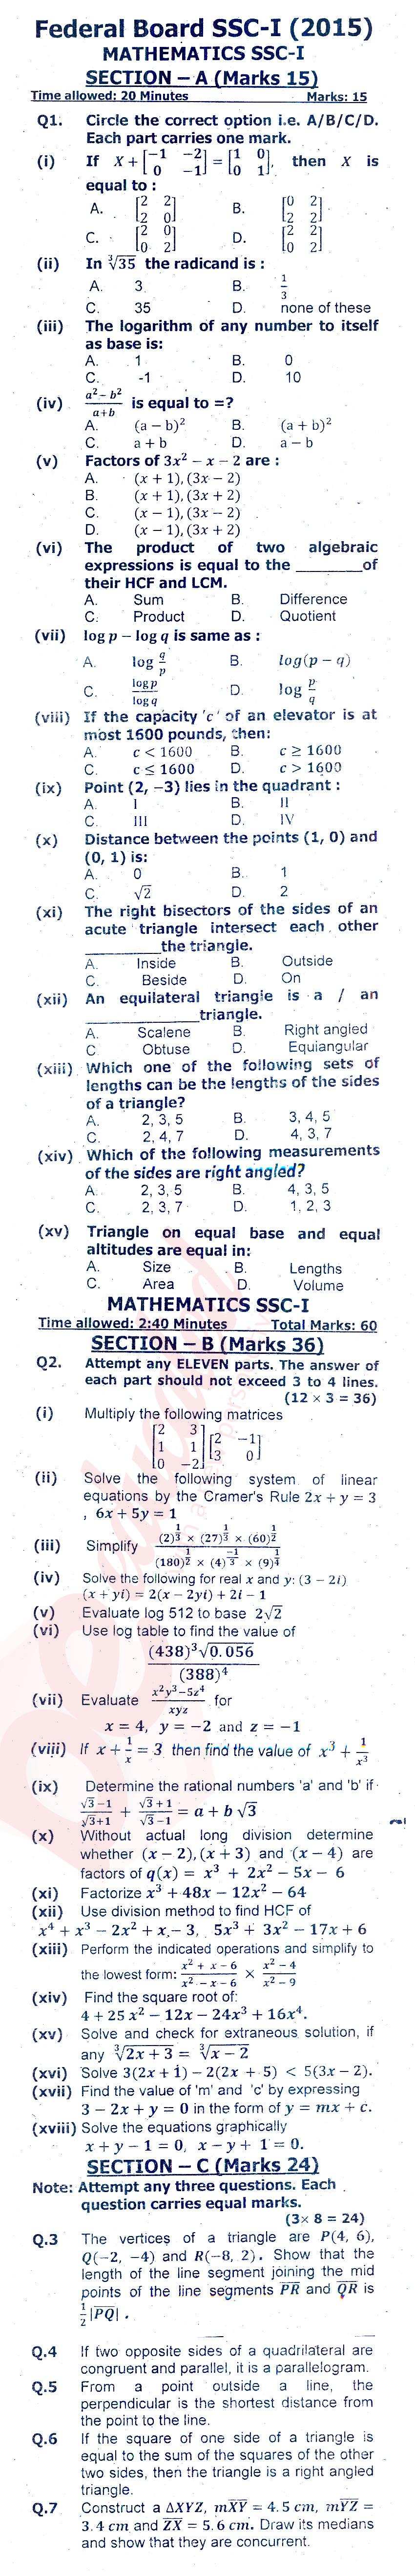 Math 9th class Past Paper Group 1 Federal BISE  2015